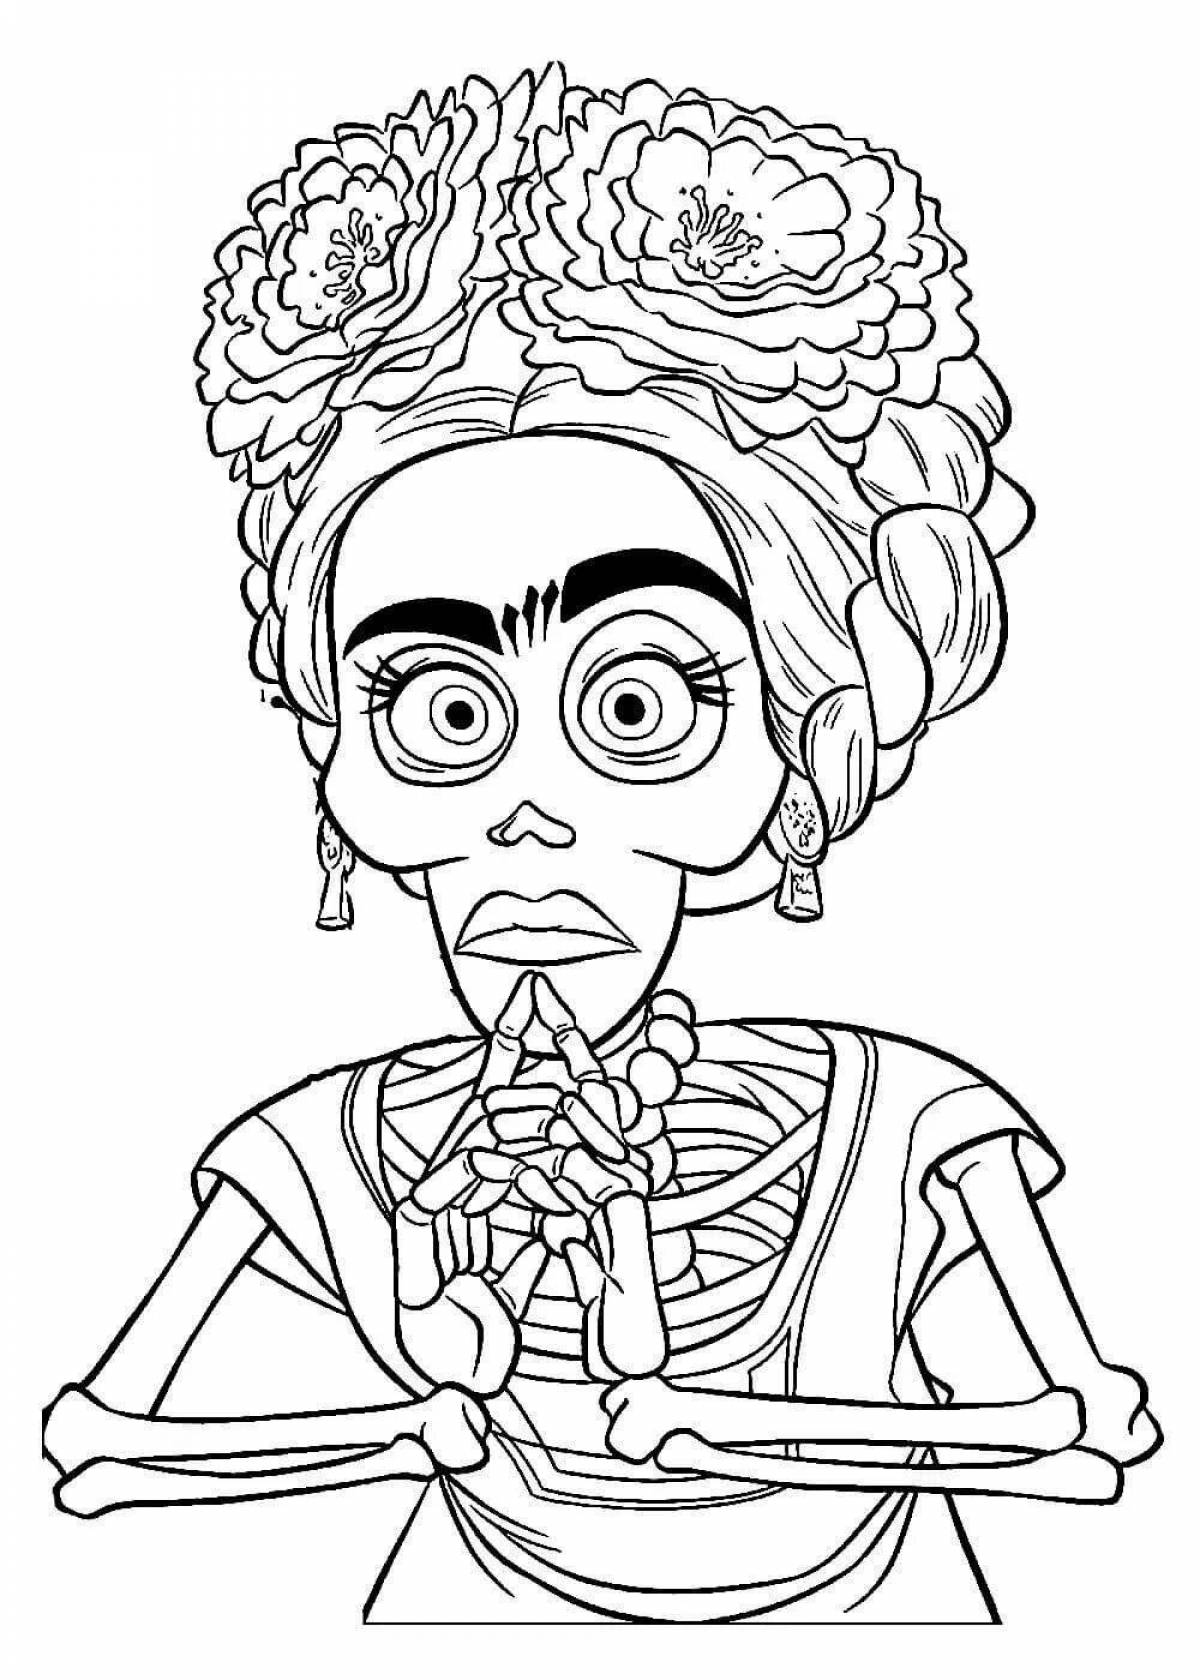 Charming coco coloring page